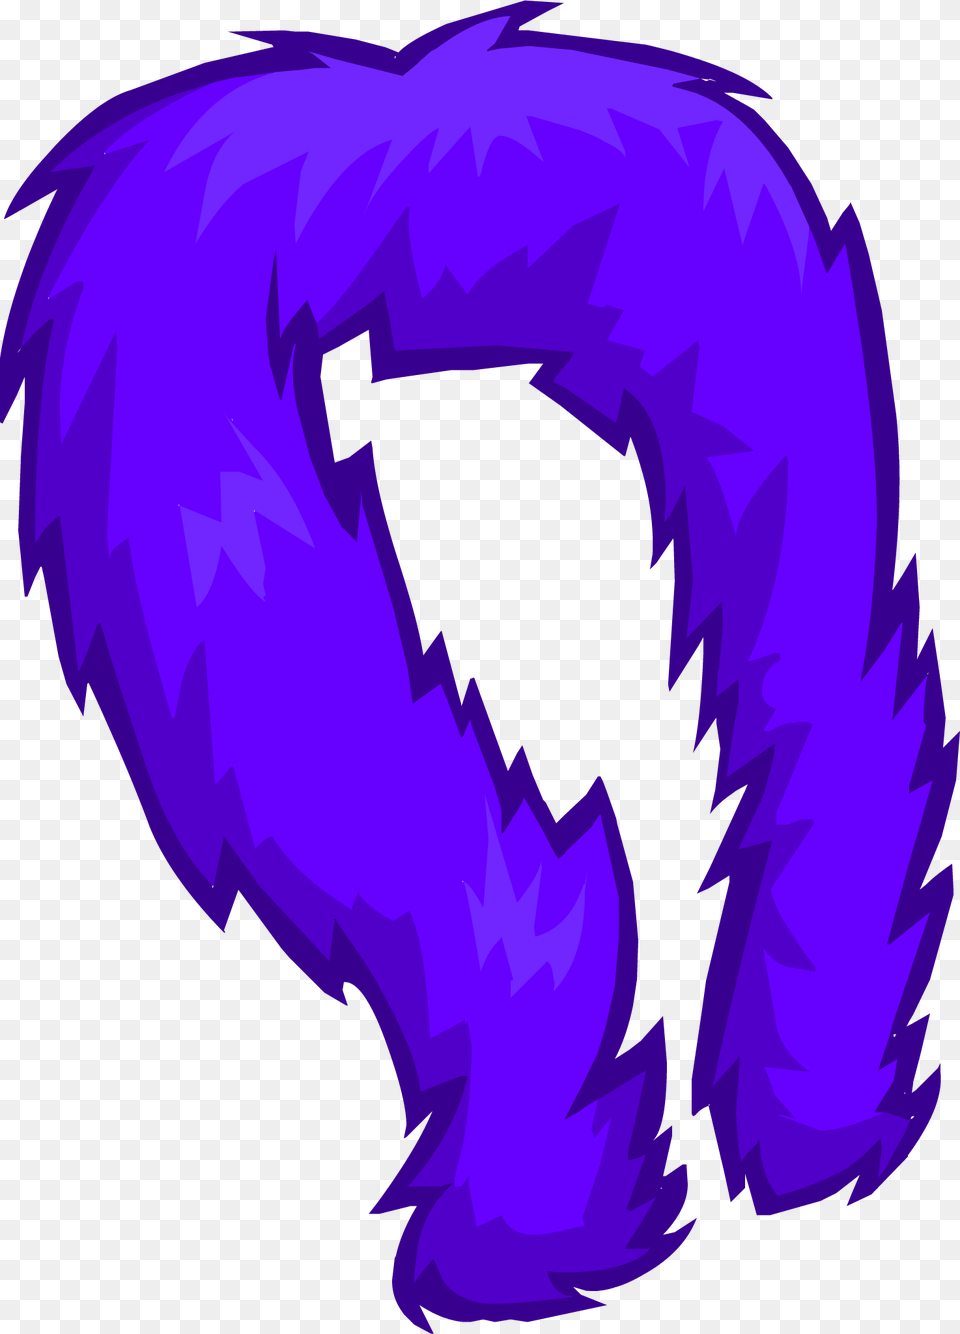 Purple Feather Boa Icon Clip Art Feather Boa, Adult, Male, Man, Person Png Image